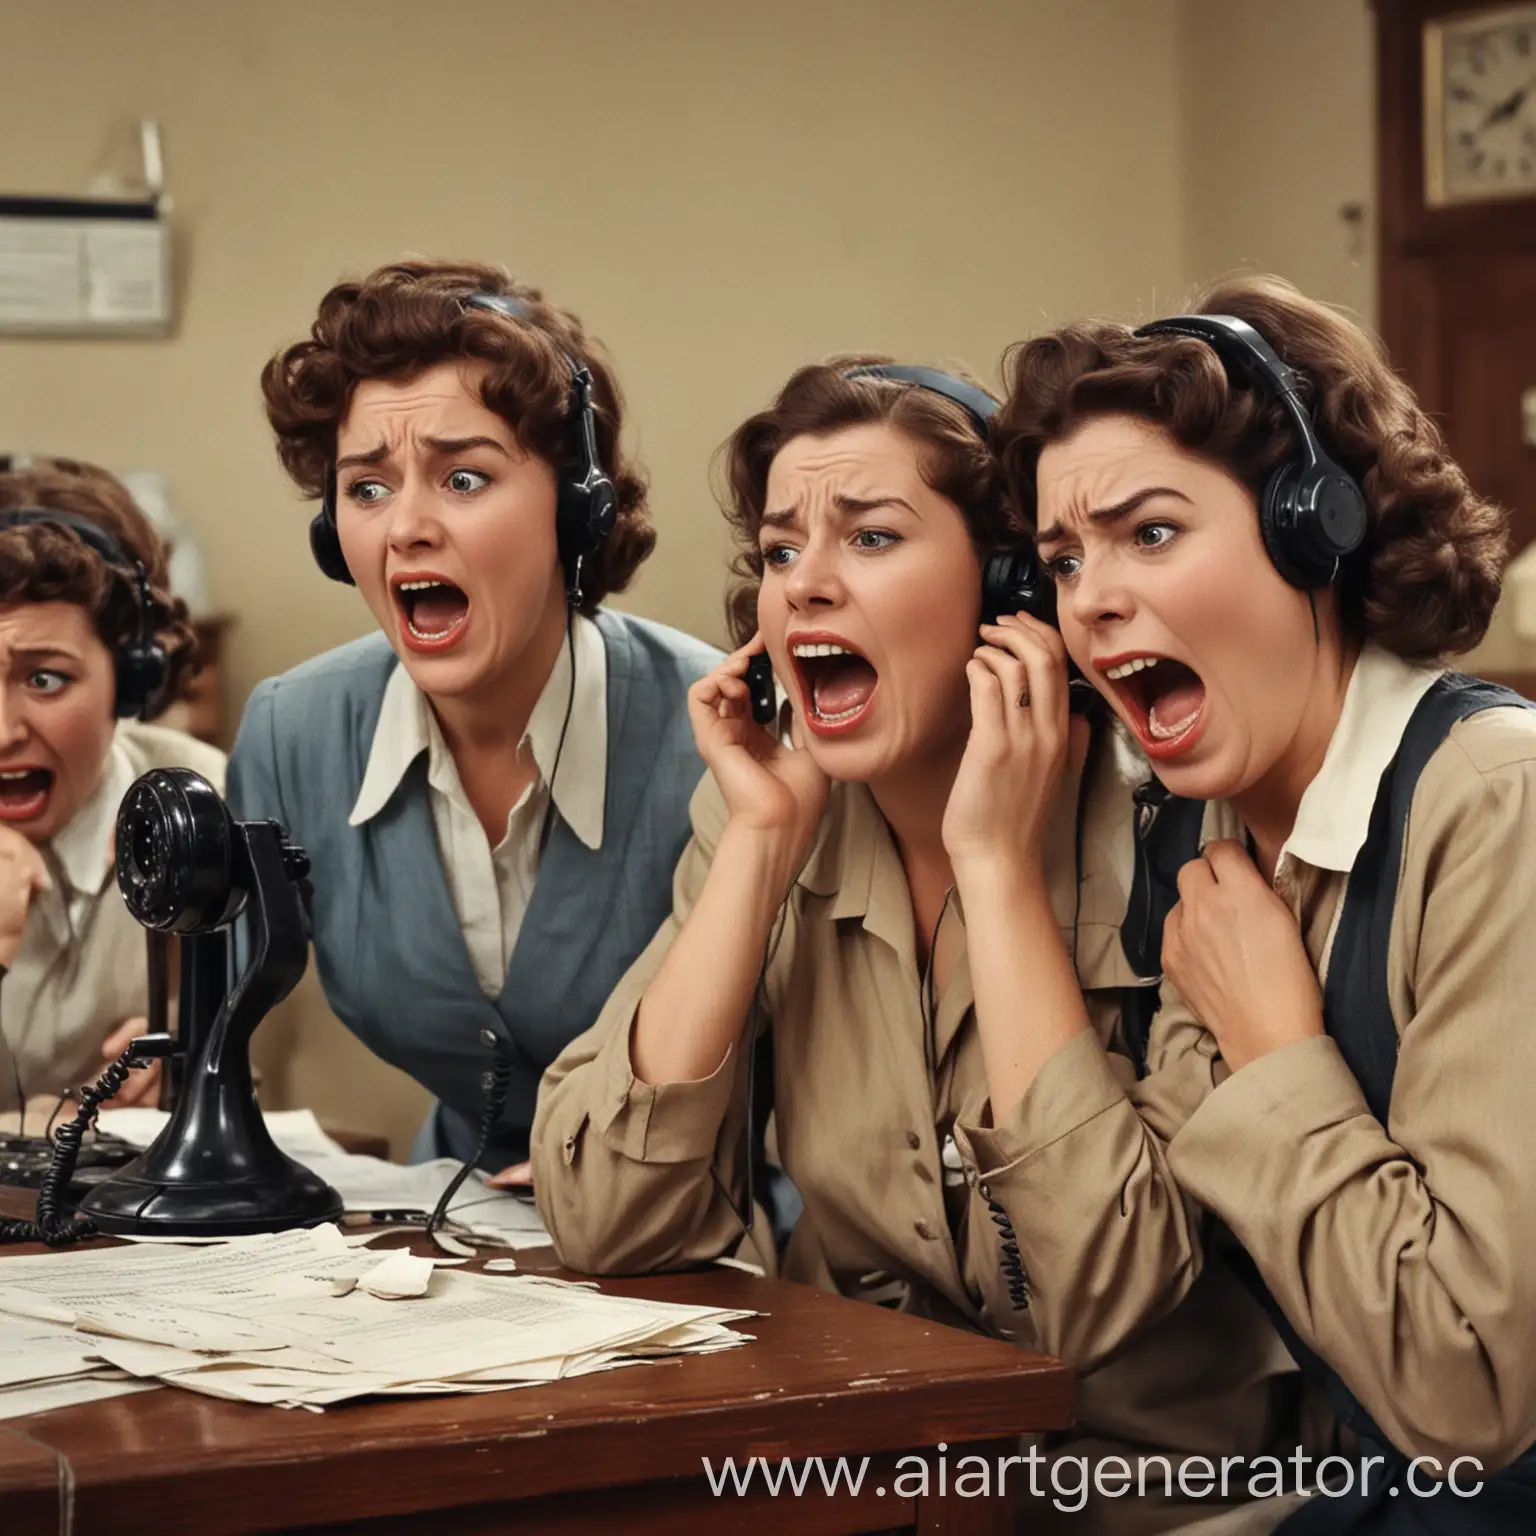 The telephone operators are crying and going crazy in a panic

